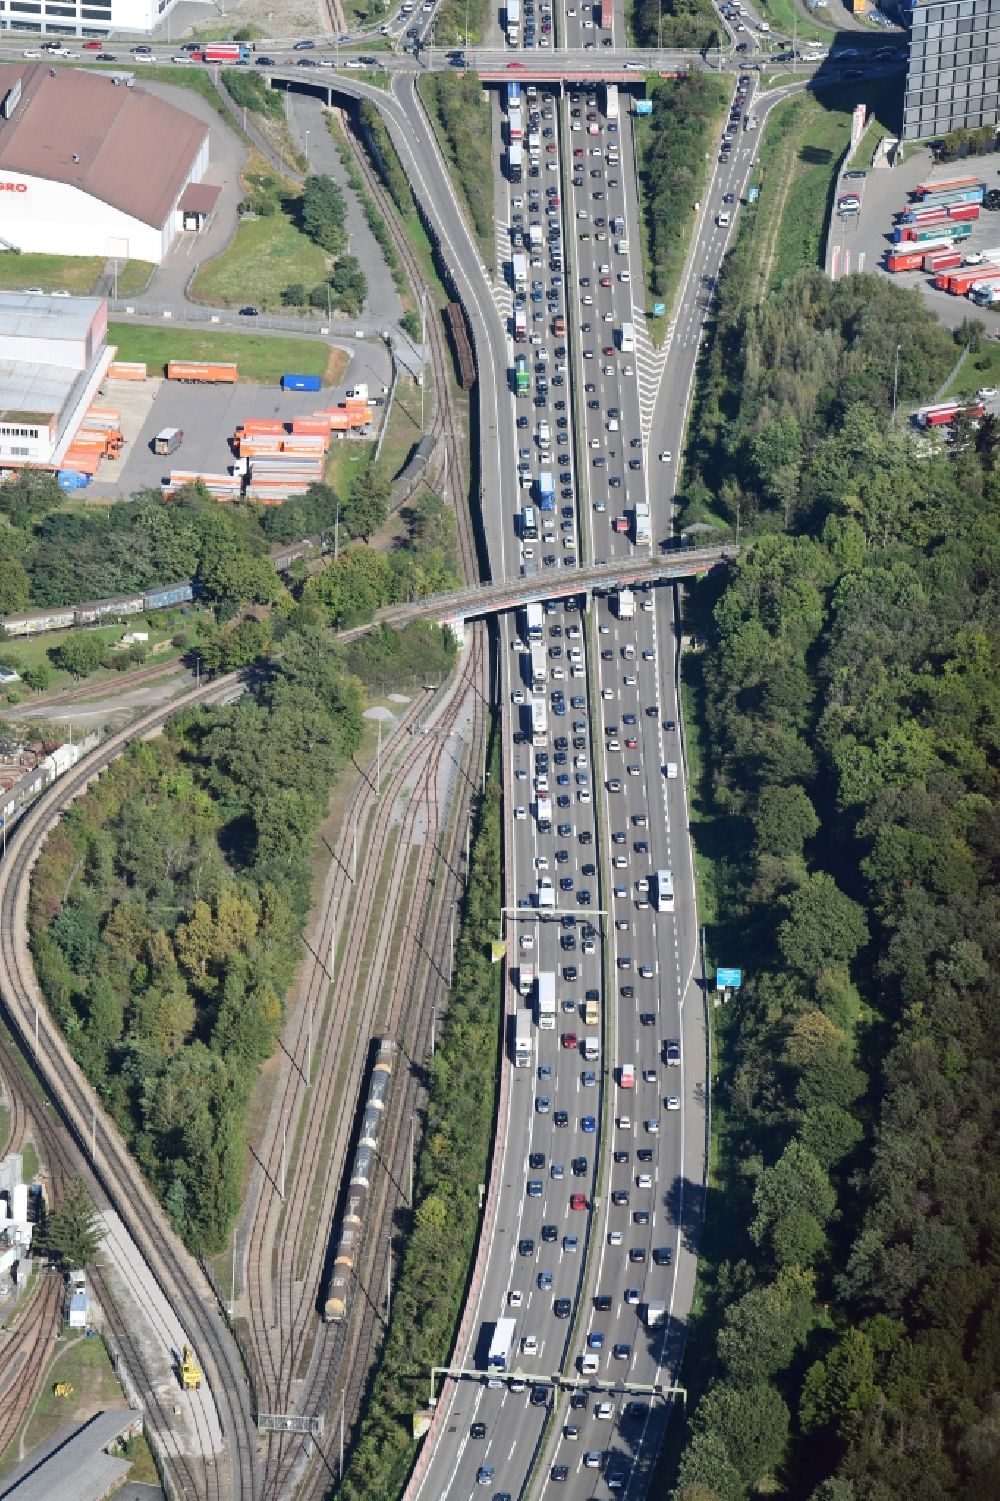 Pratteln from the bird's eye view: Highway congestion along the route of the lanes of the swiss motorway A2 / A3 in Pratteln next to Basle in the canton Basel-Landschaft, Switzerland